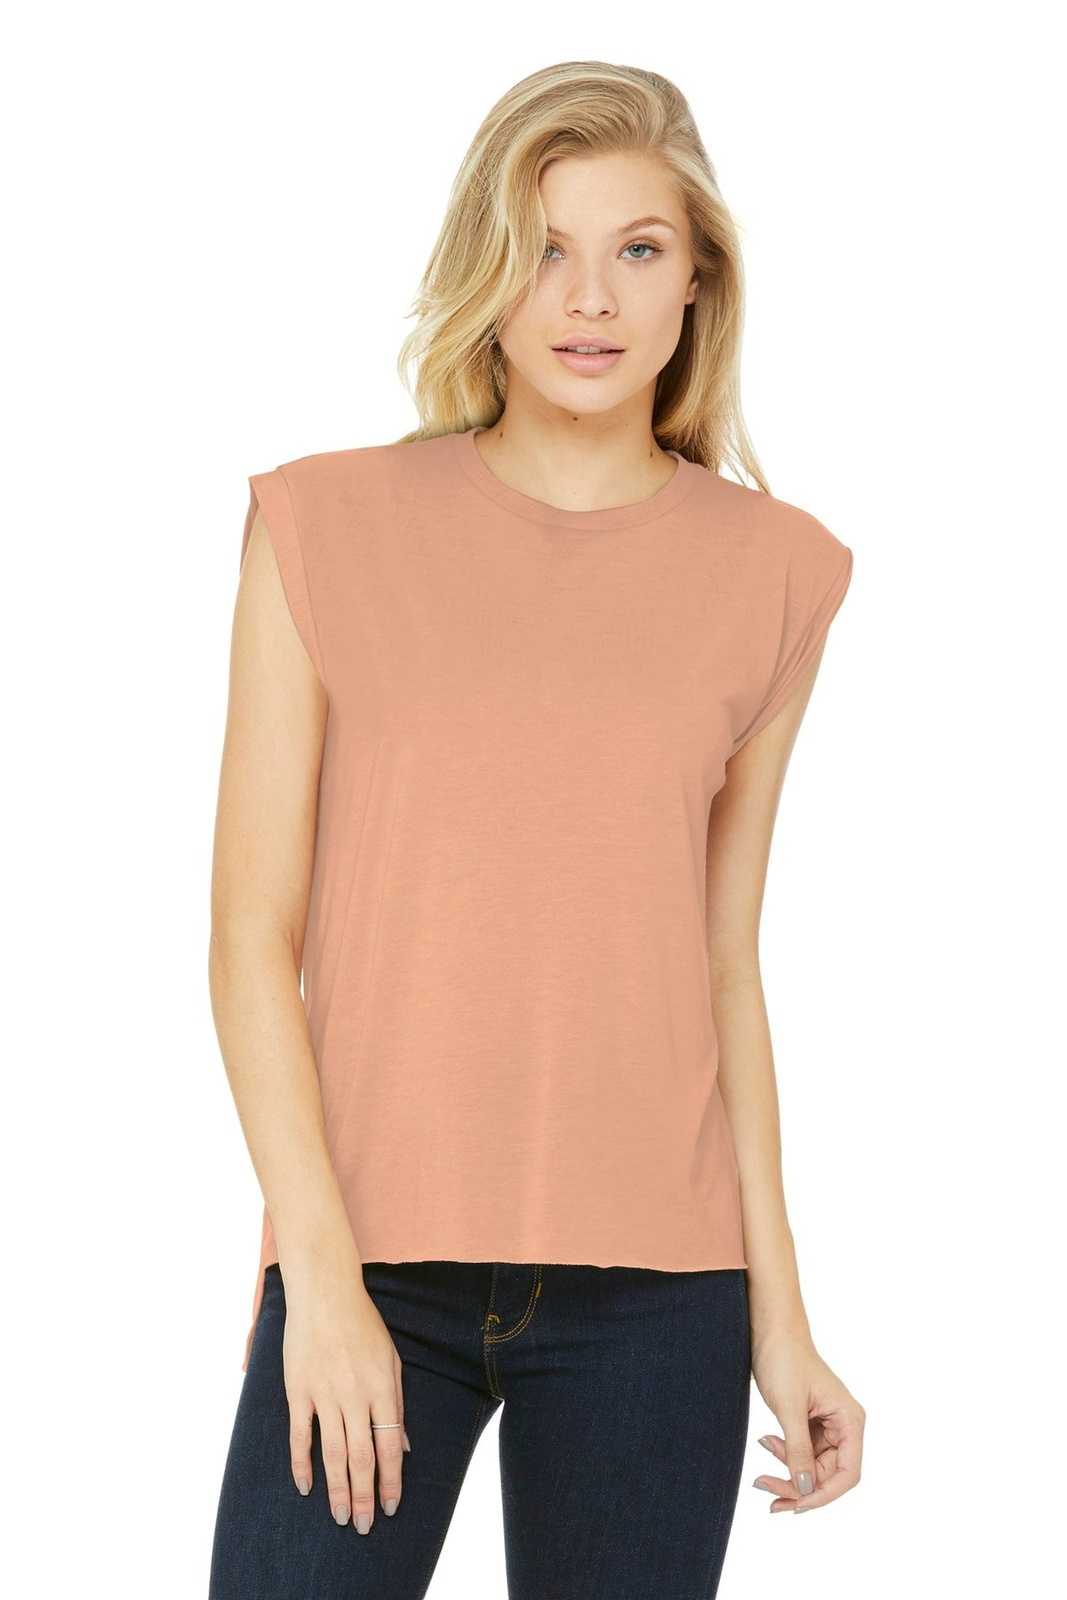 Bella + Canvas 8804 Women's Flowy Muscle Tee with Rolled Cuffs - Peach - HIT a Double